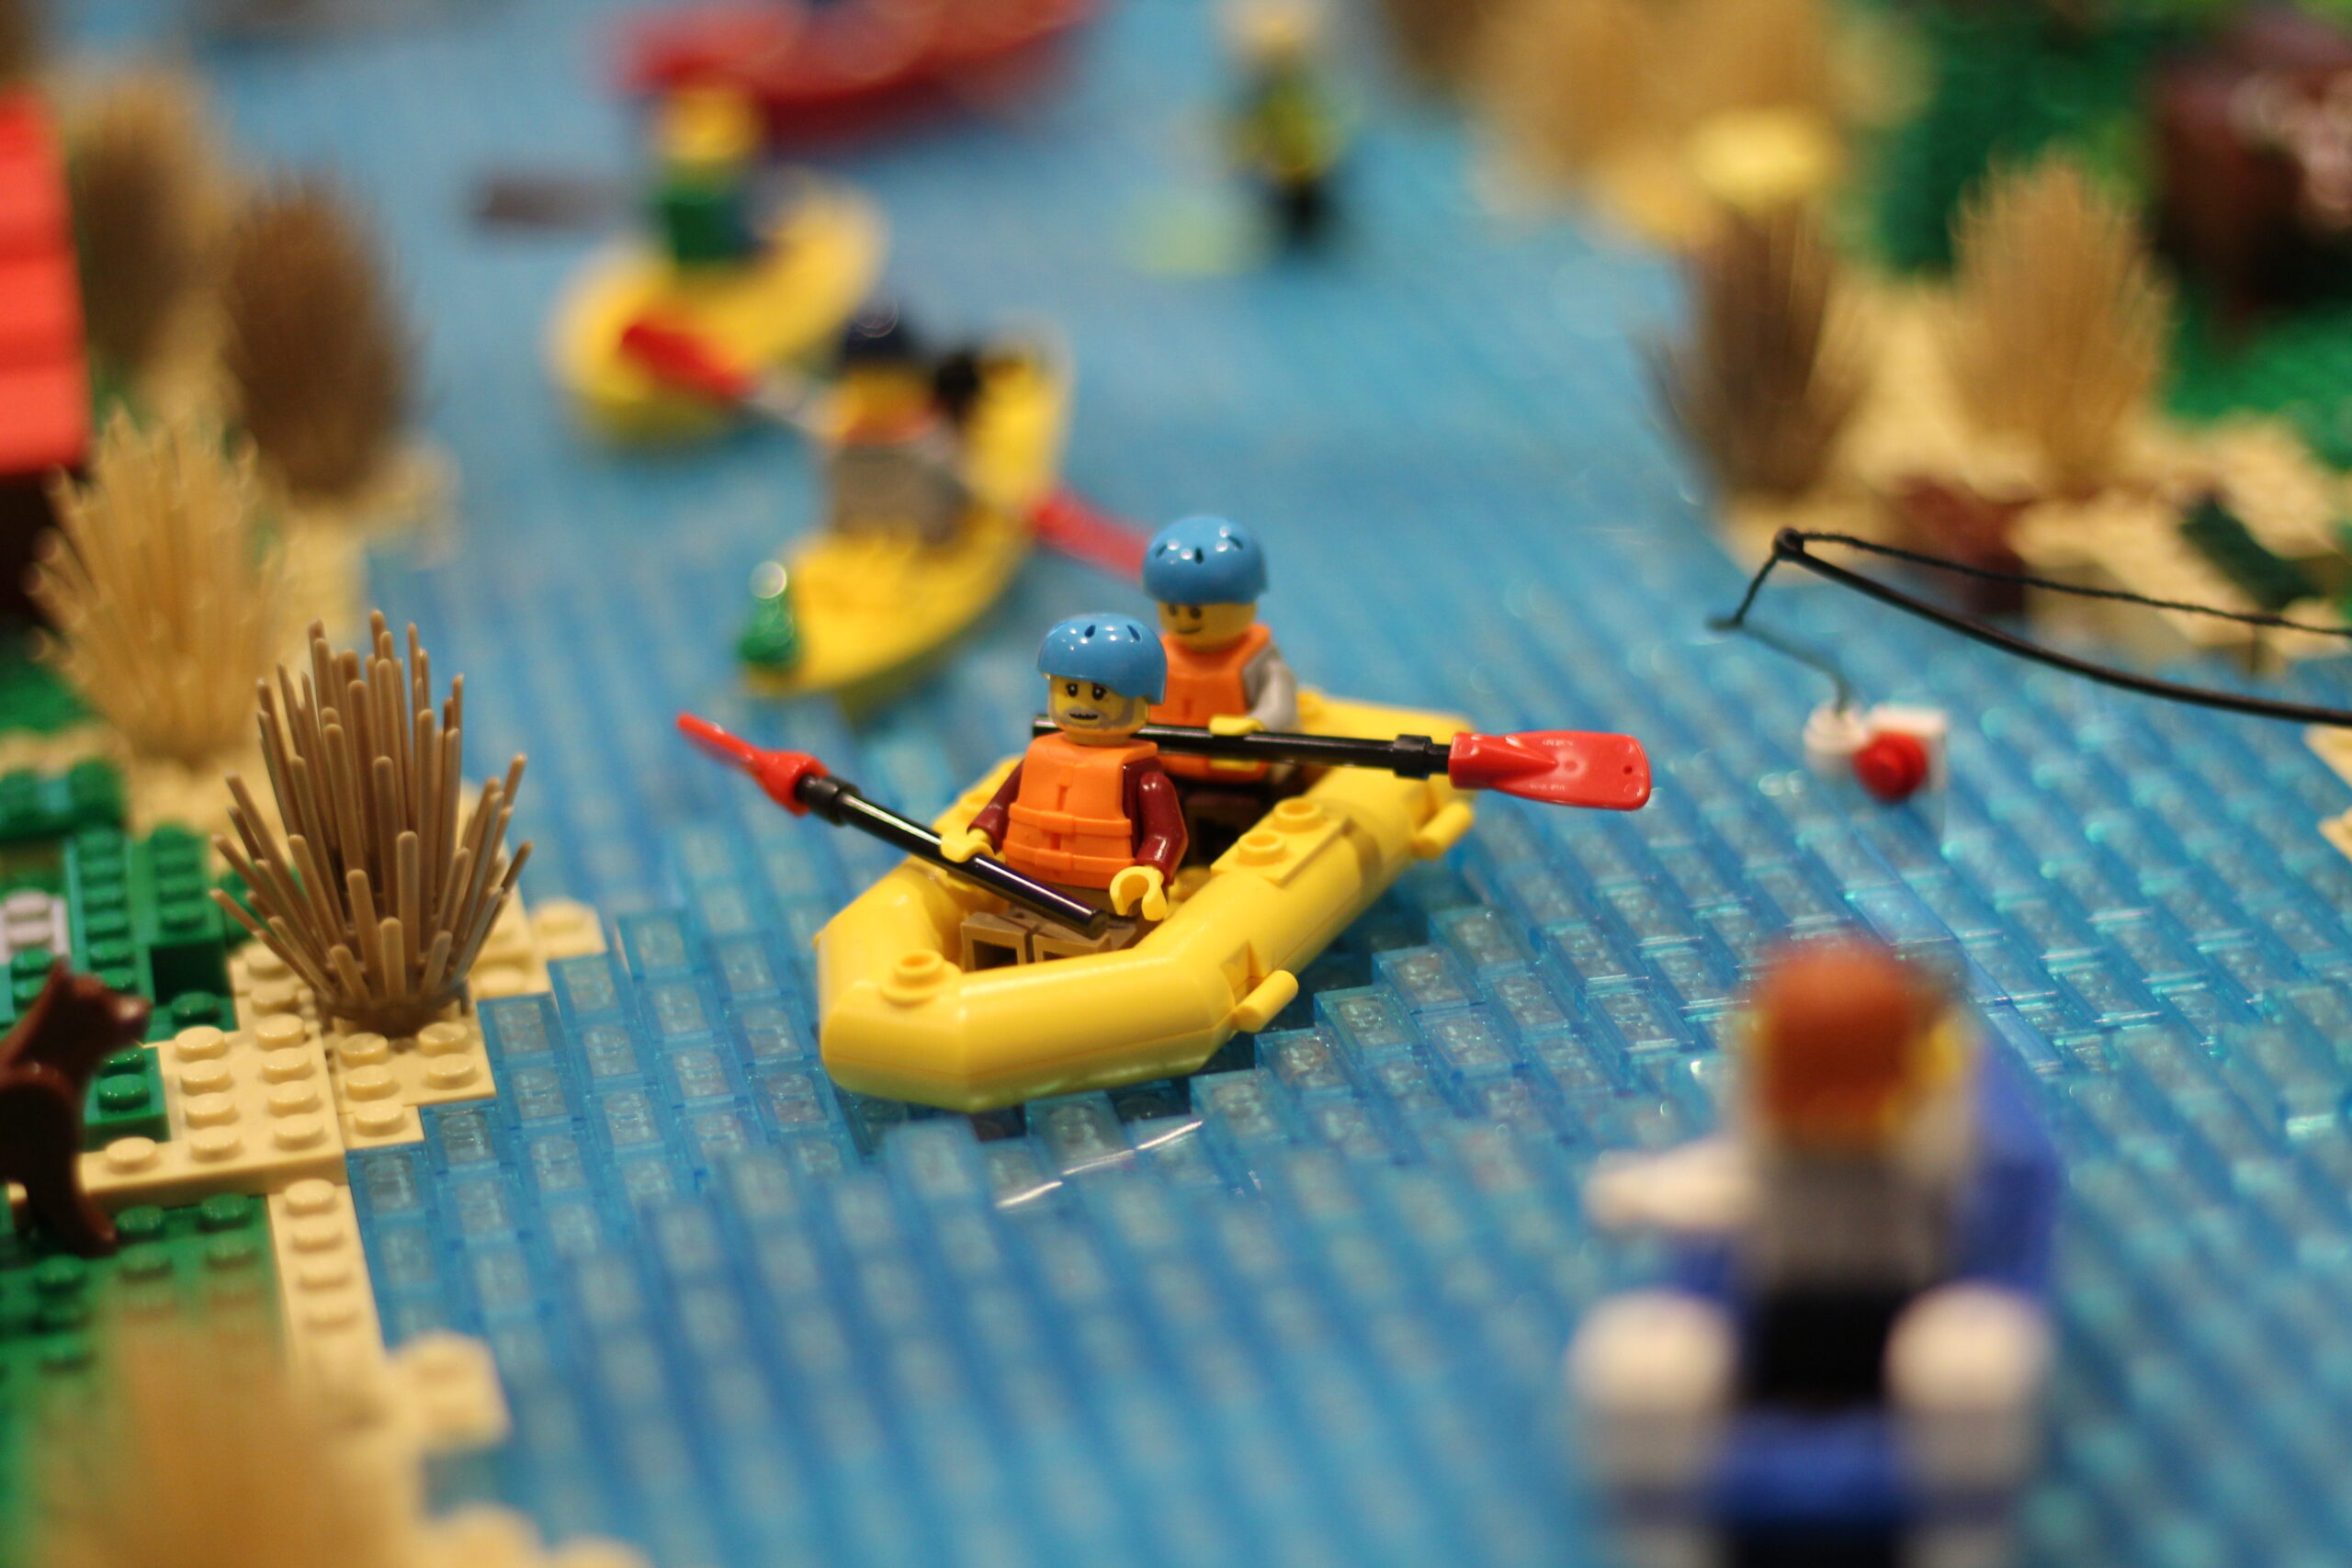 Think Outside the Brick: The Creative Art of LEGO® 2021 detail image